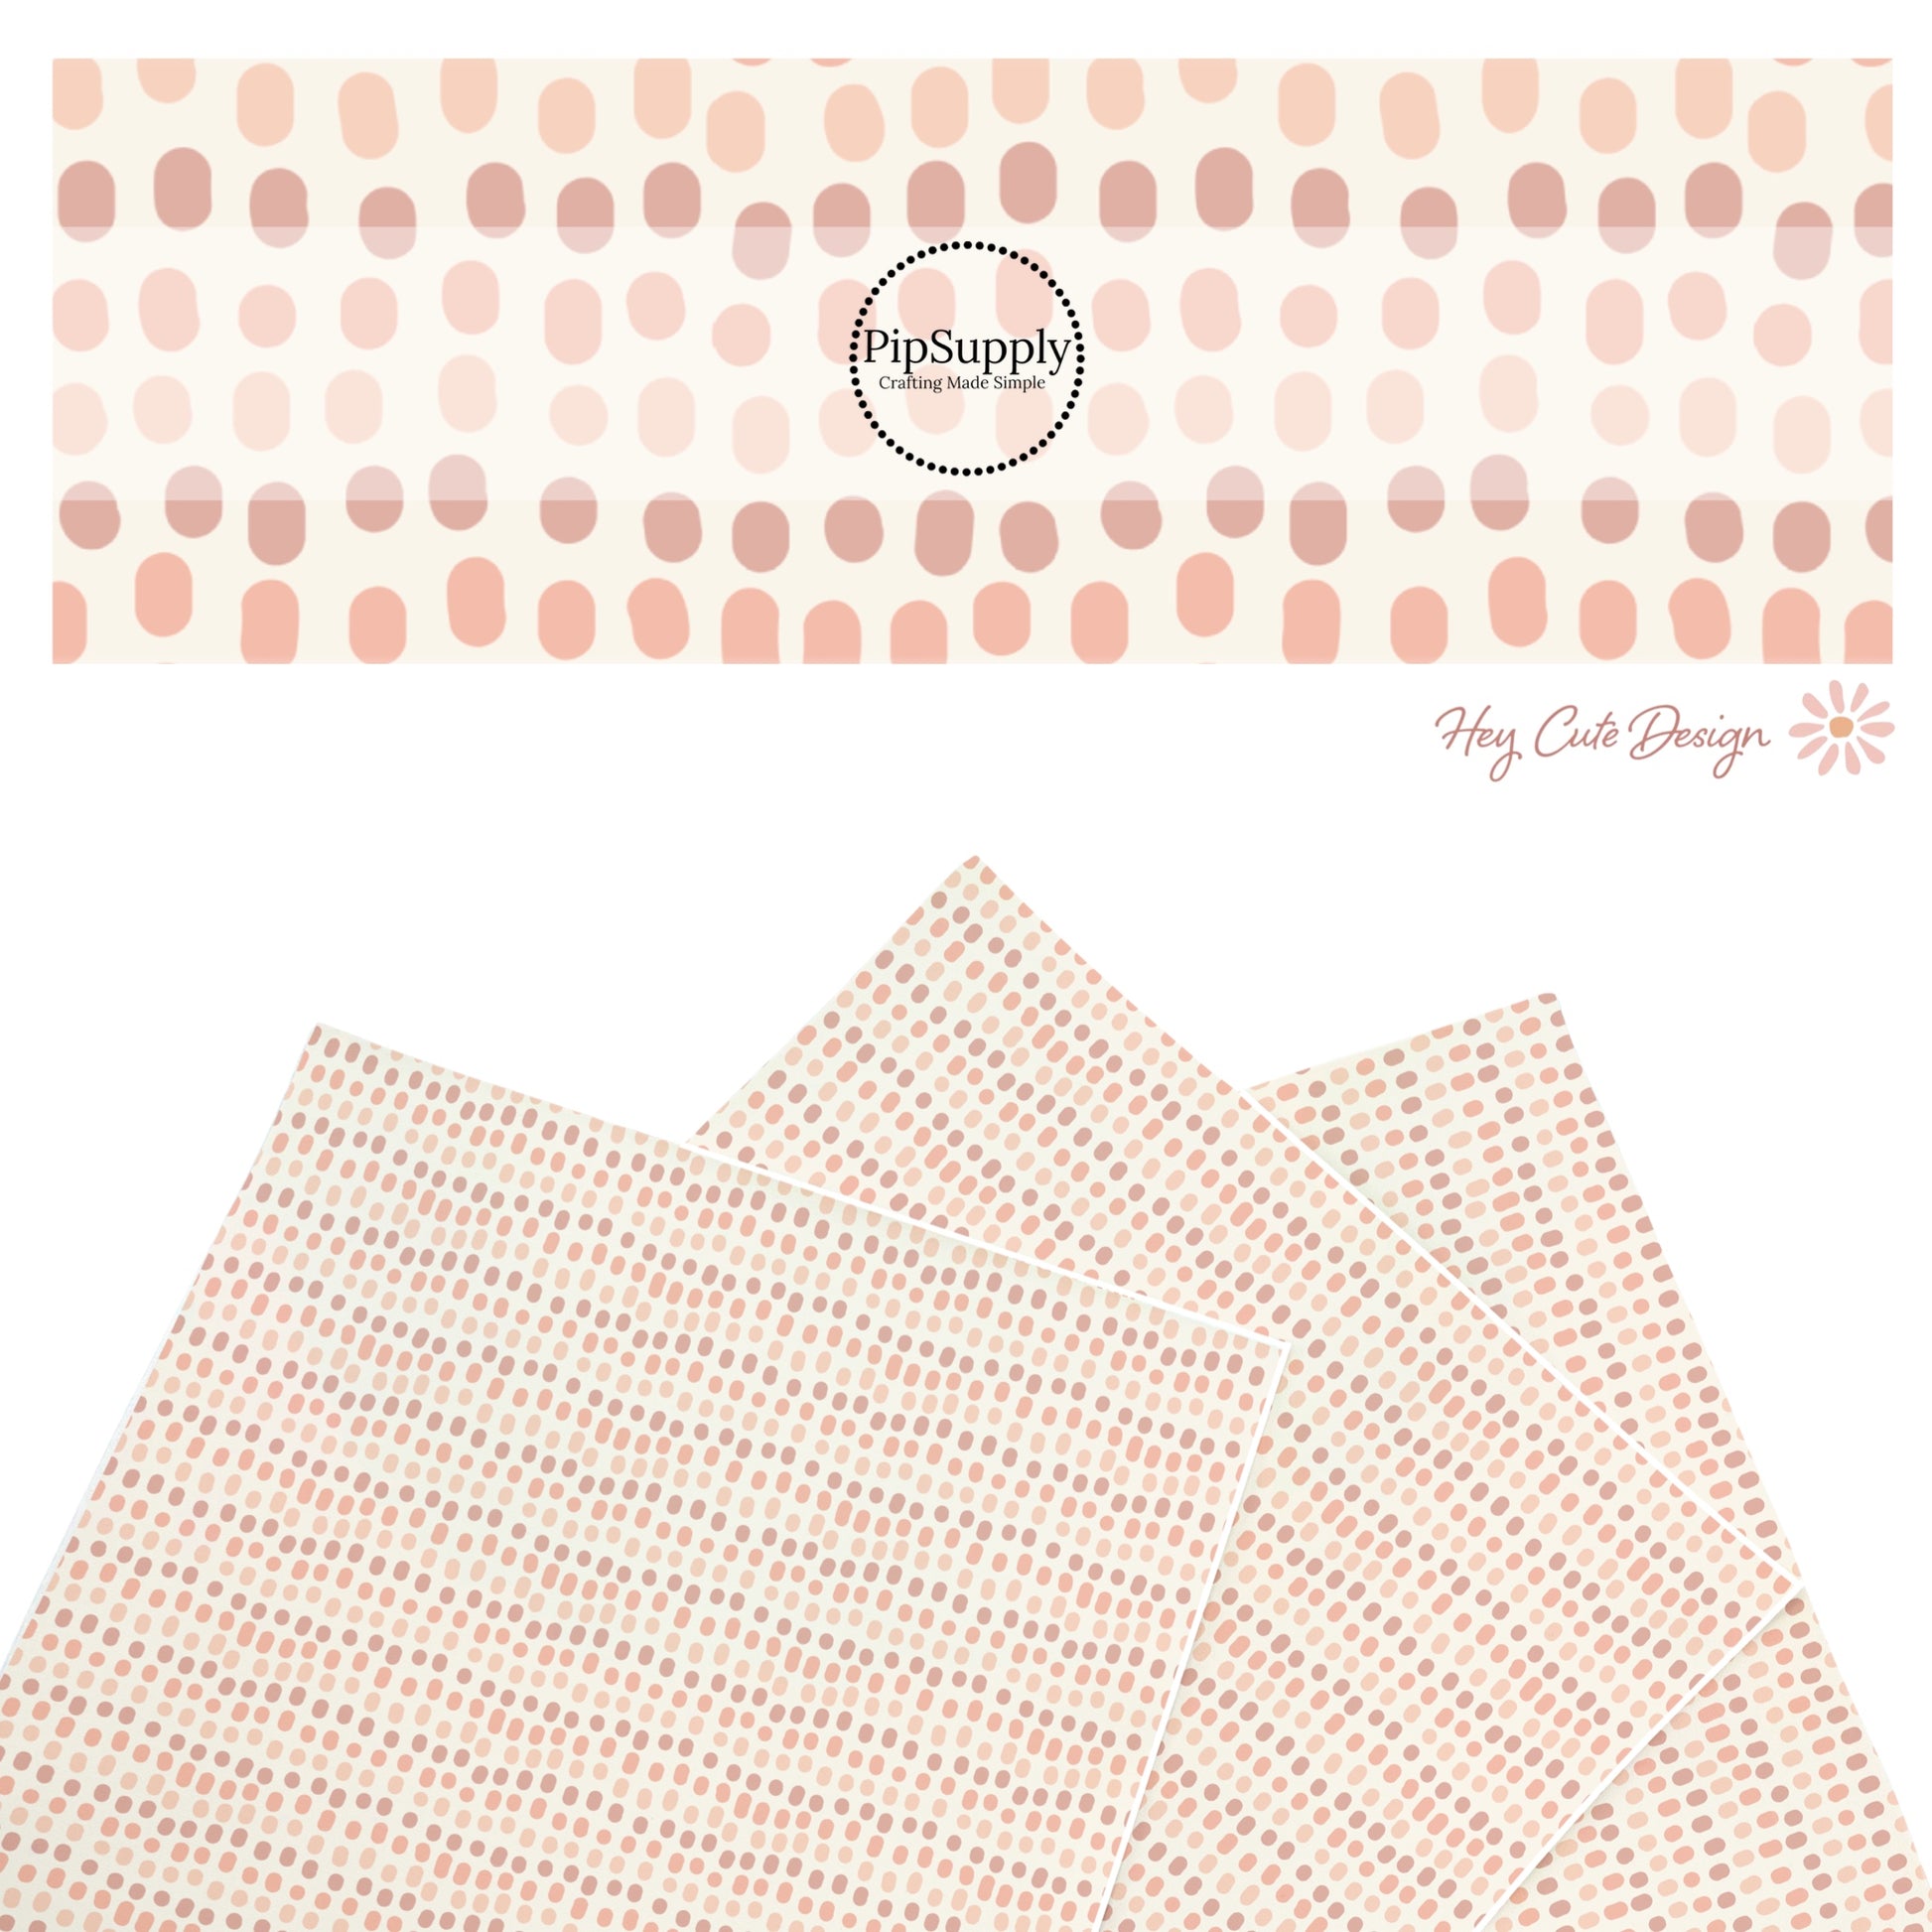 These summer faux leather sheets contain the following design elements: pink ombre dots. Our CPSIA compliant faux leather sheets or rolls can be used for all types of crafting projects.